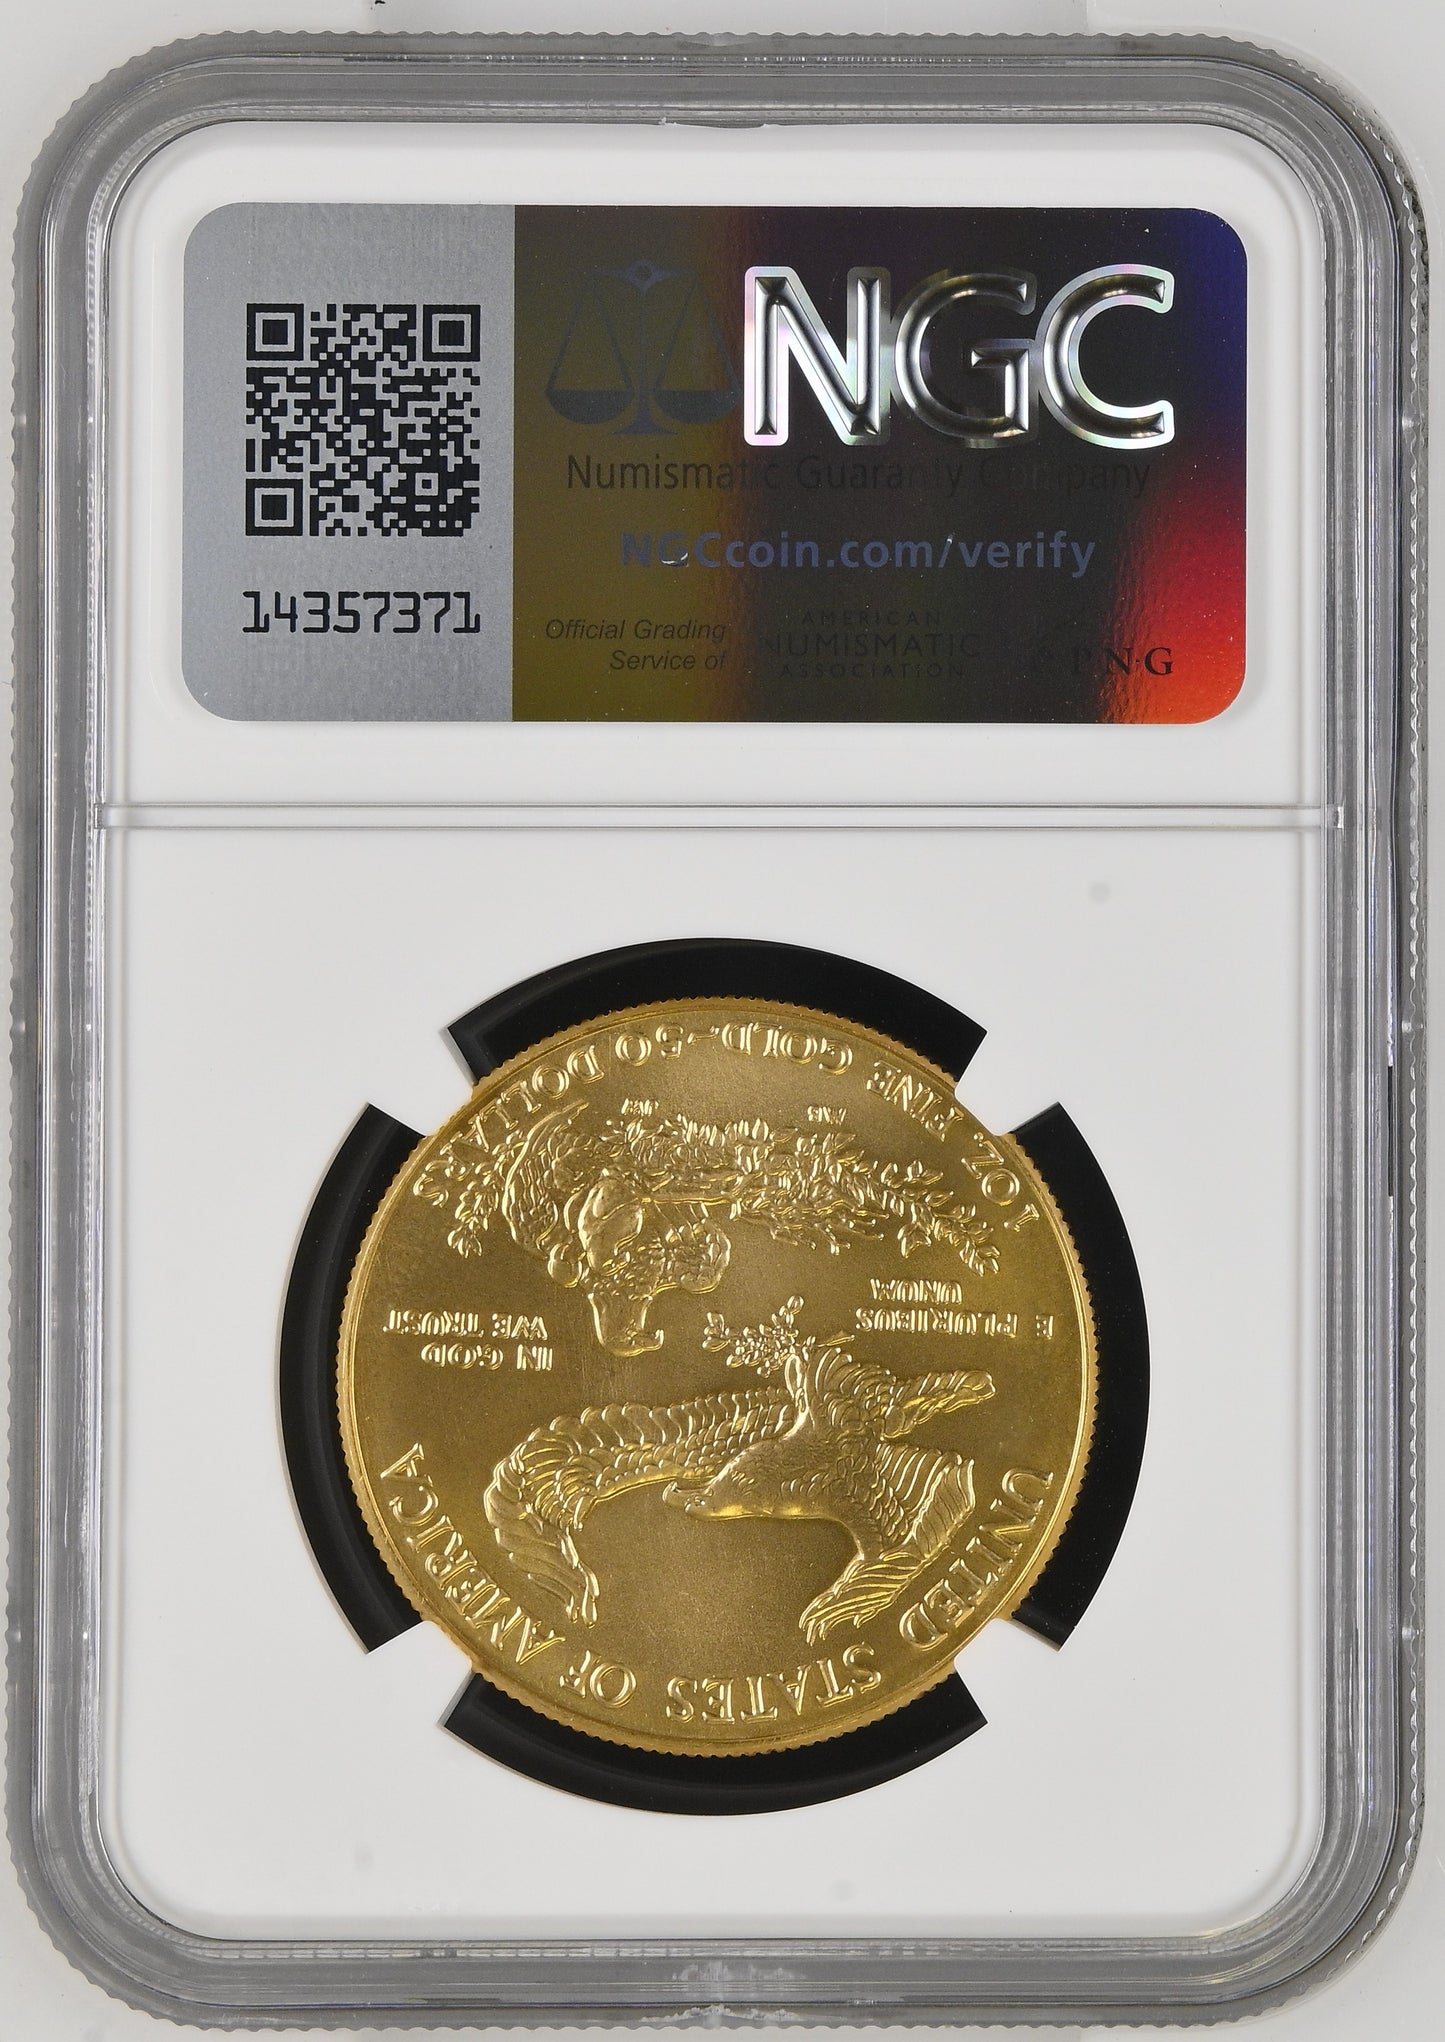 1989 1 oz Gold American Eagle 50$ Bullion Gold Coin - NGC MS 69